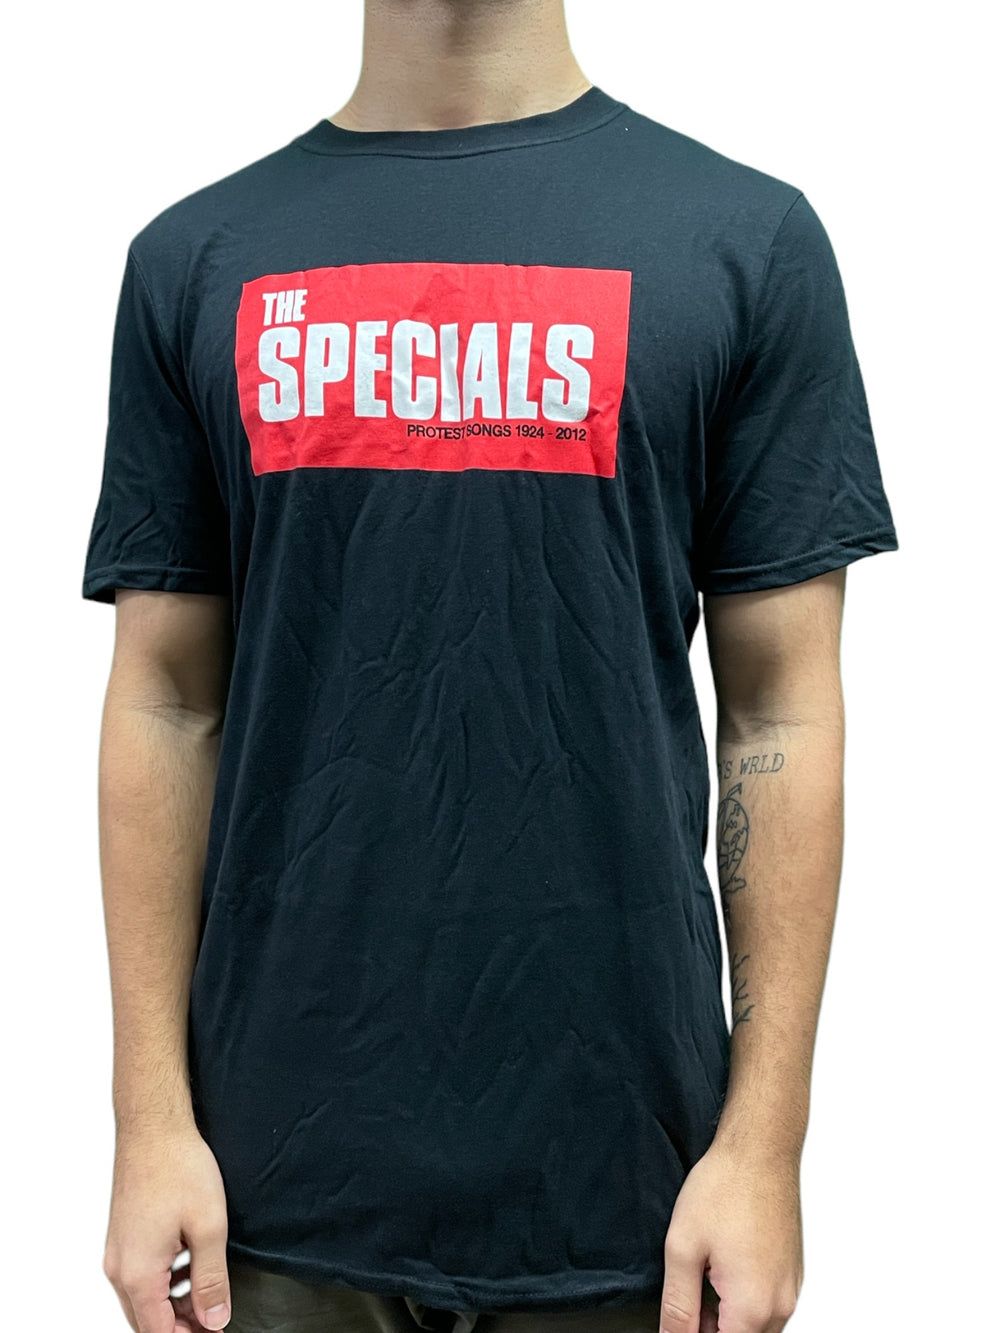 The Specials Protest Songs Unisex Official T Shirt Brand New Various Sizes Special AKA